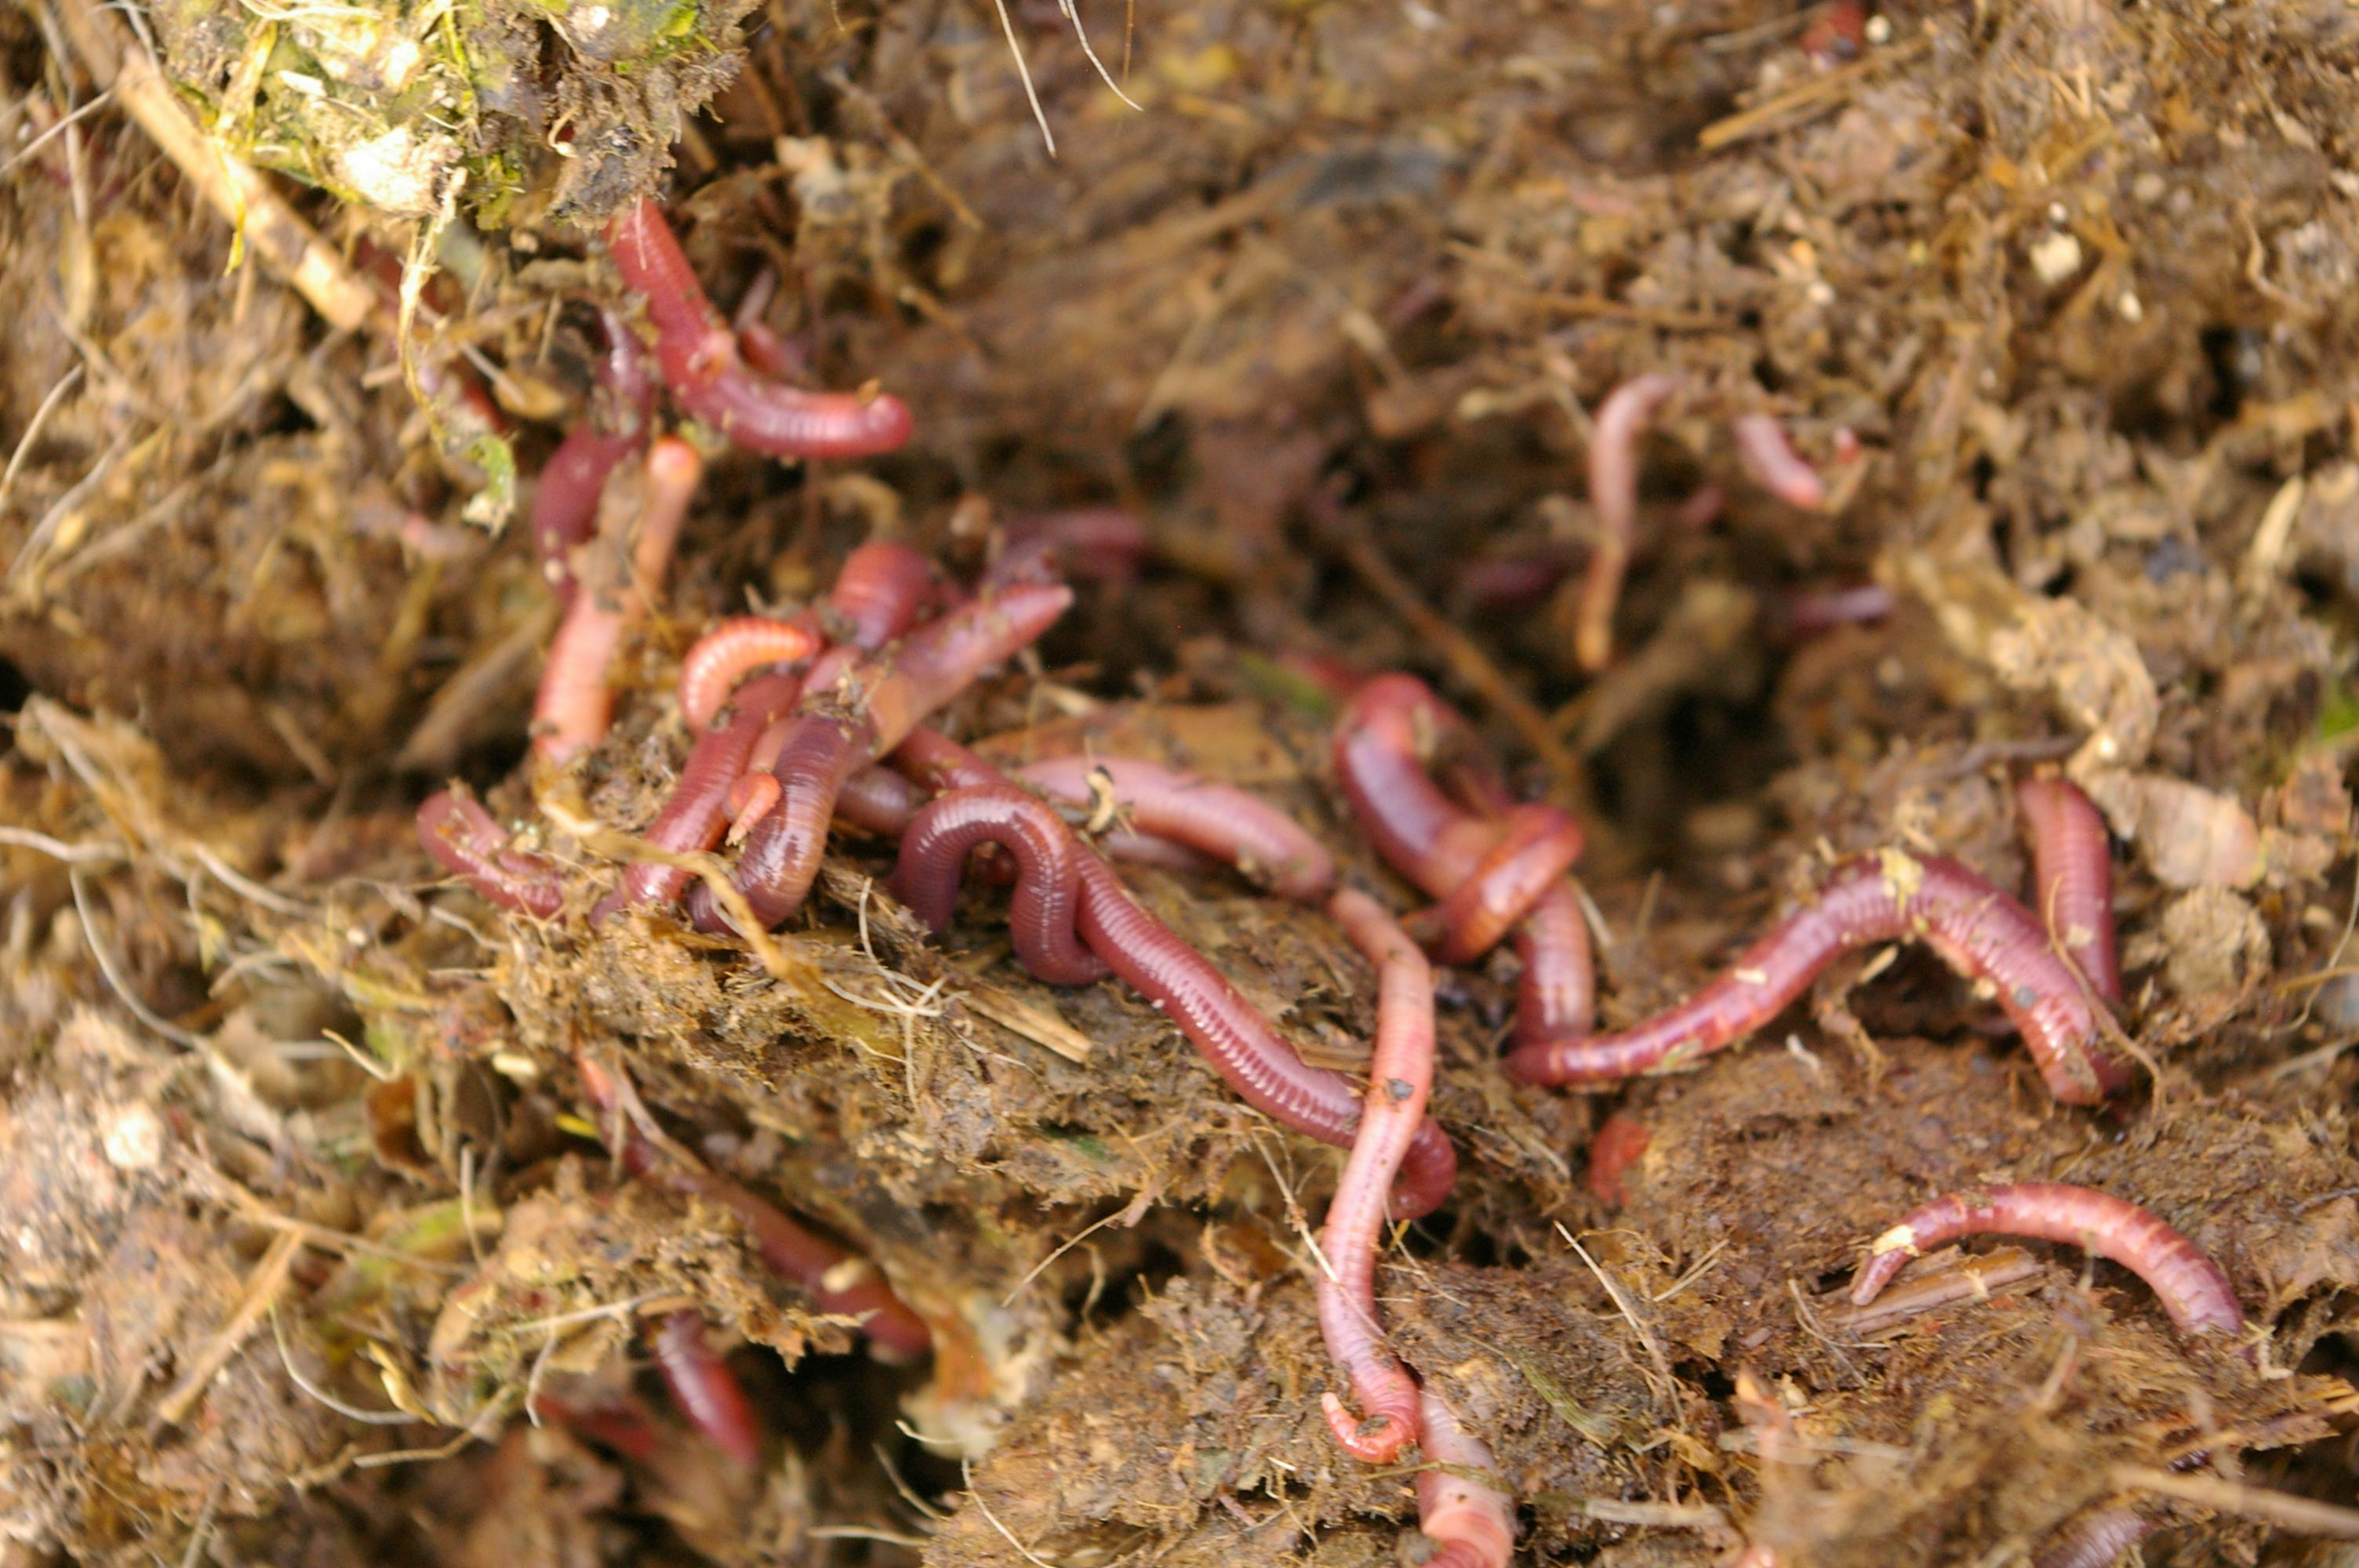 Let the worms do the work: Tricks and tips for backyard composting